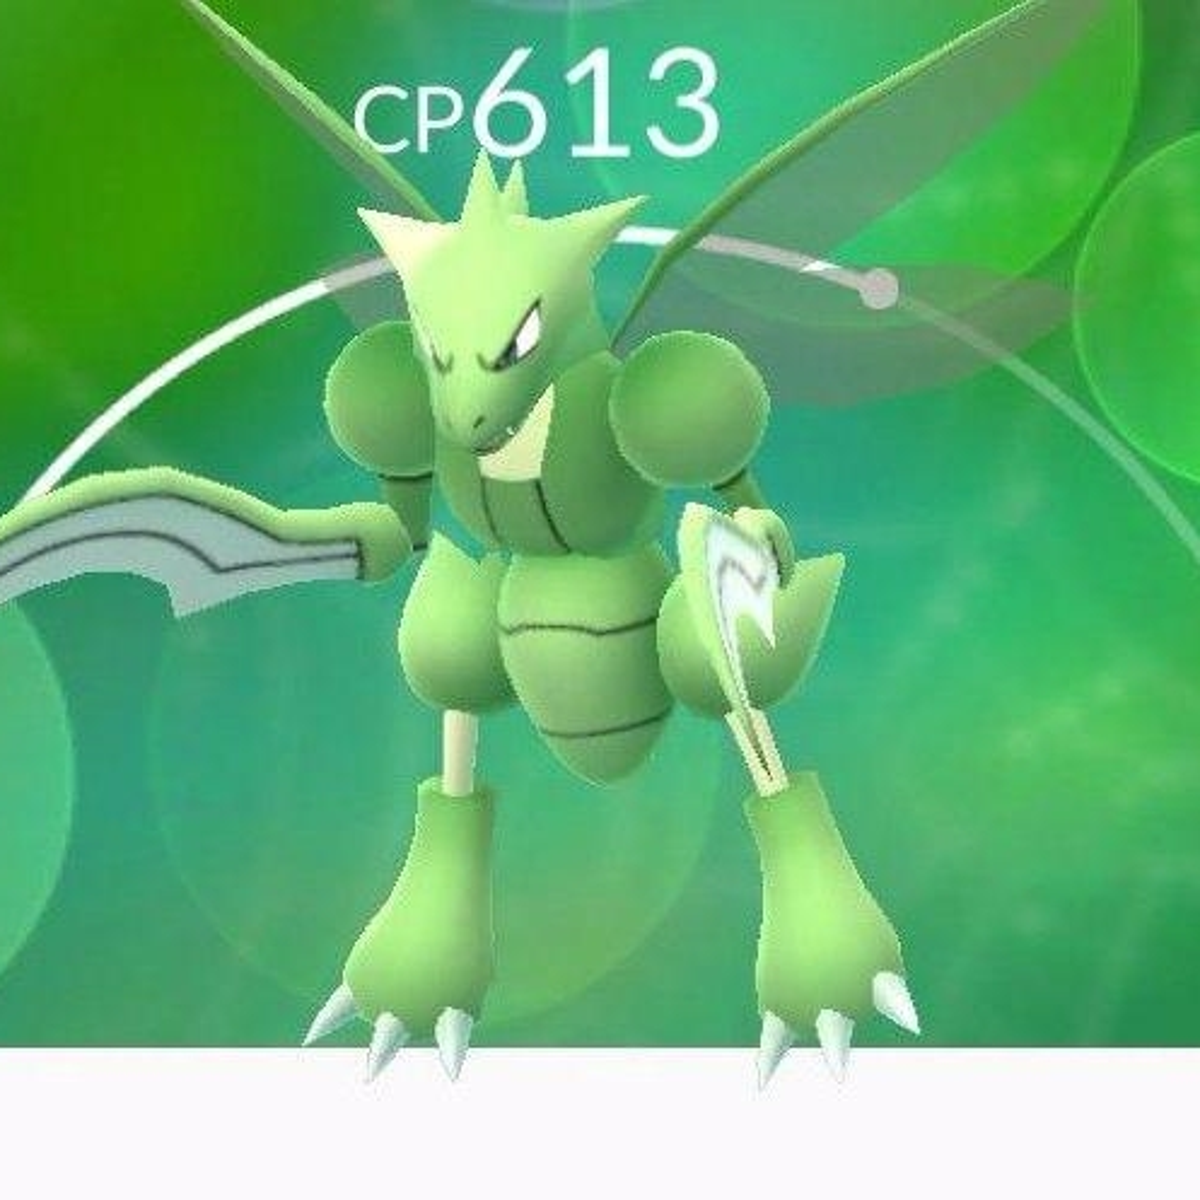 https://assetsio.gnwcdn.com/pokemon-go-metal-coat-how-to-evolve-scyther-into-scizor-onix-into-steelix-and-how-to-get-the-metal-coat-4819-1487325122707.jpg?width=1200&height=1200&fit=crop&quality=100&format=png&enable=upscale&auto=webp